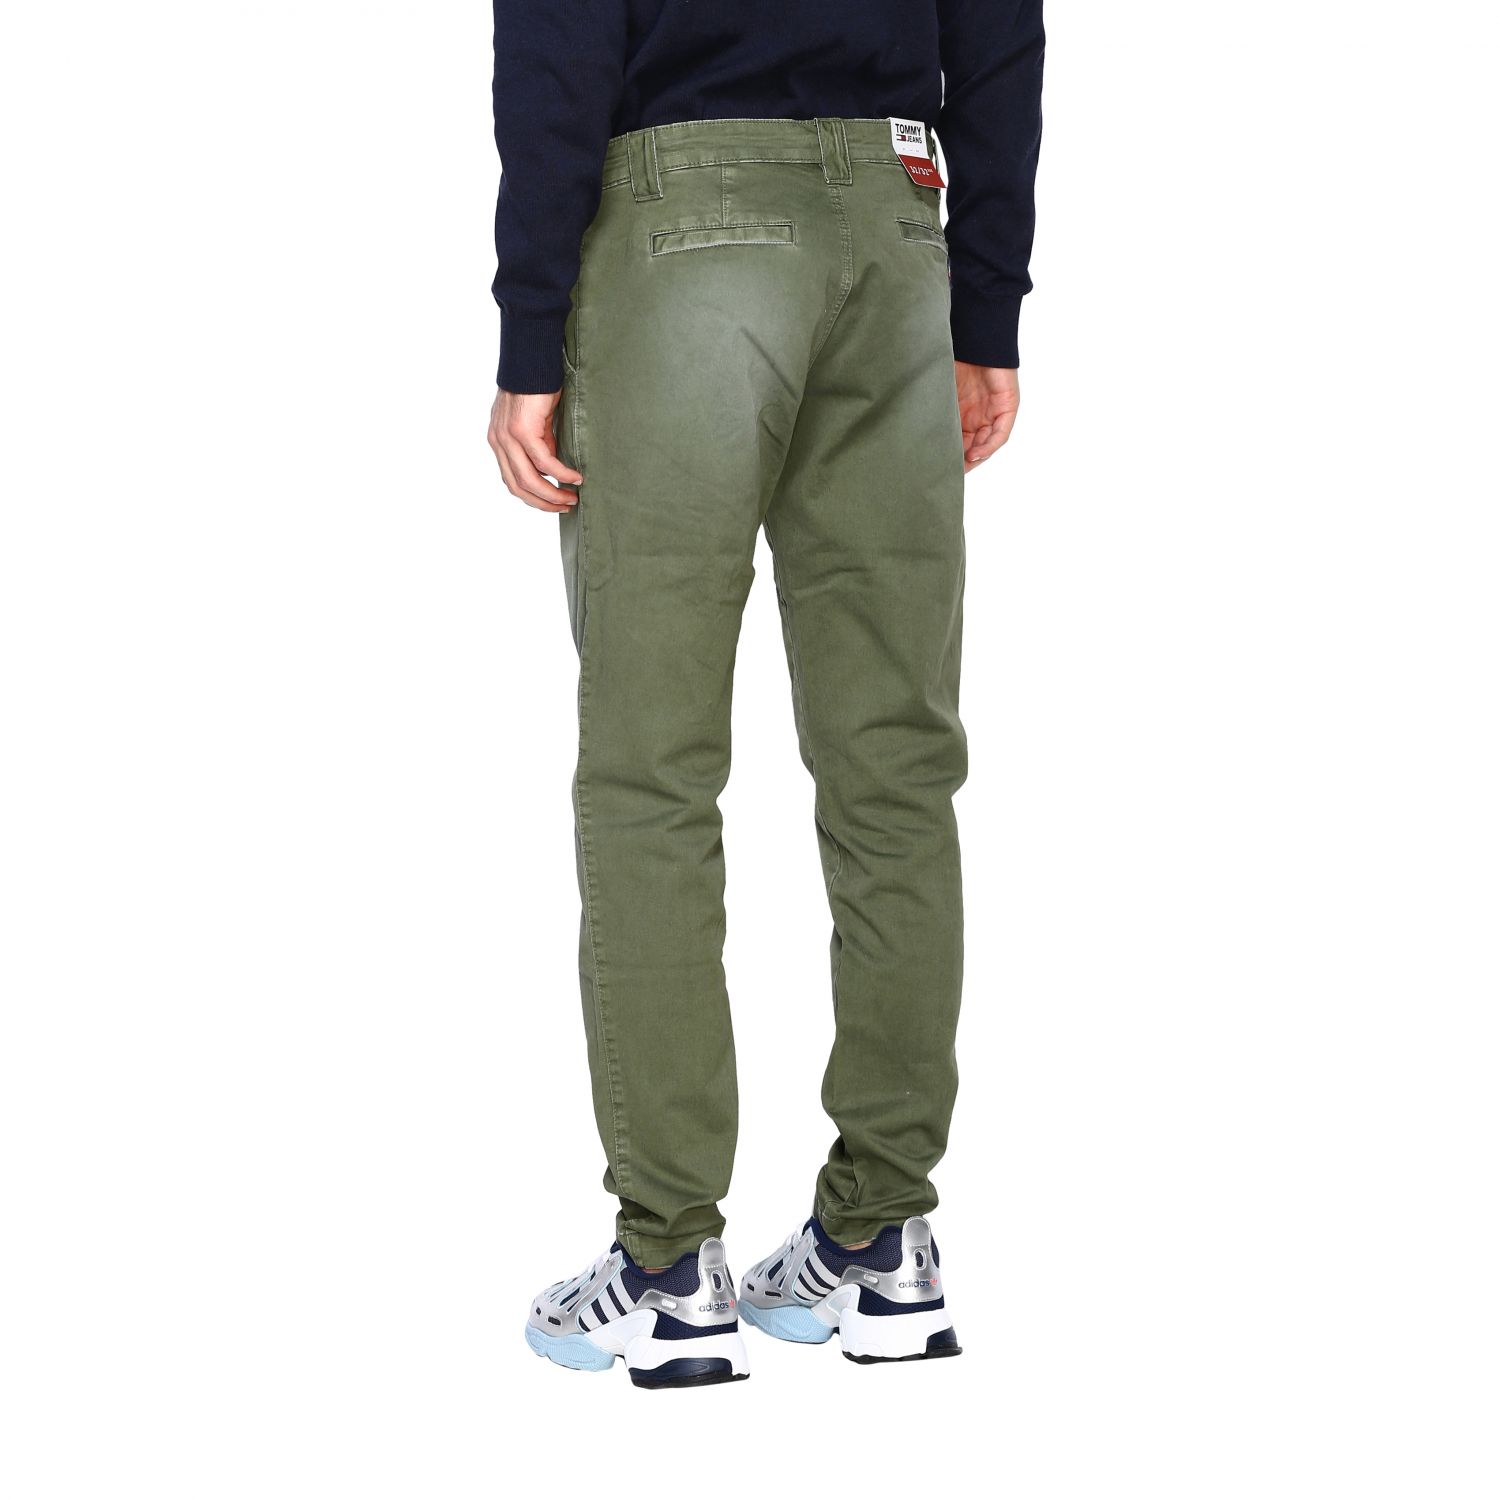 Tommy Hilfiger Green Pants Italy, SAVE 60% -